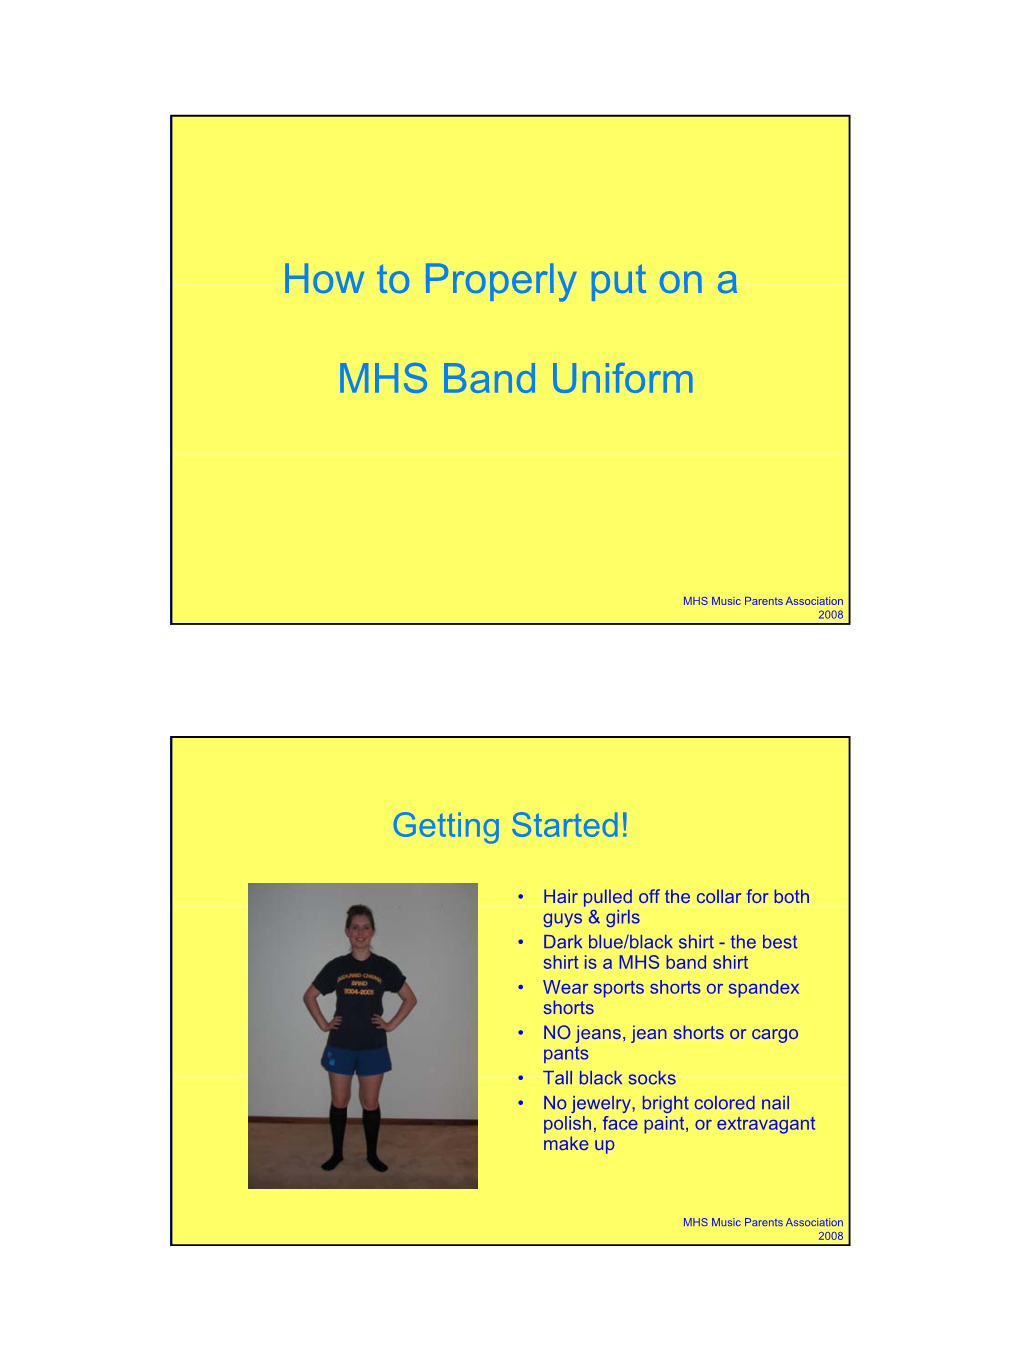 How to Properly Put on a MHS Band Uniform